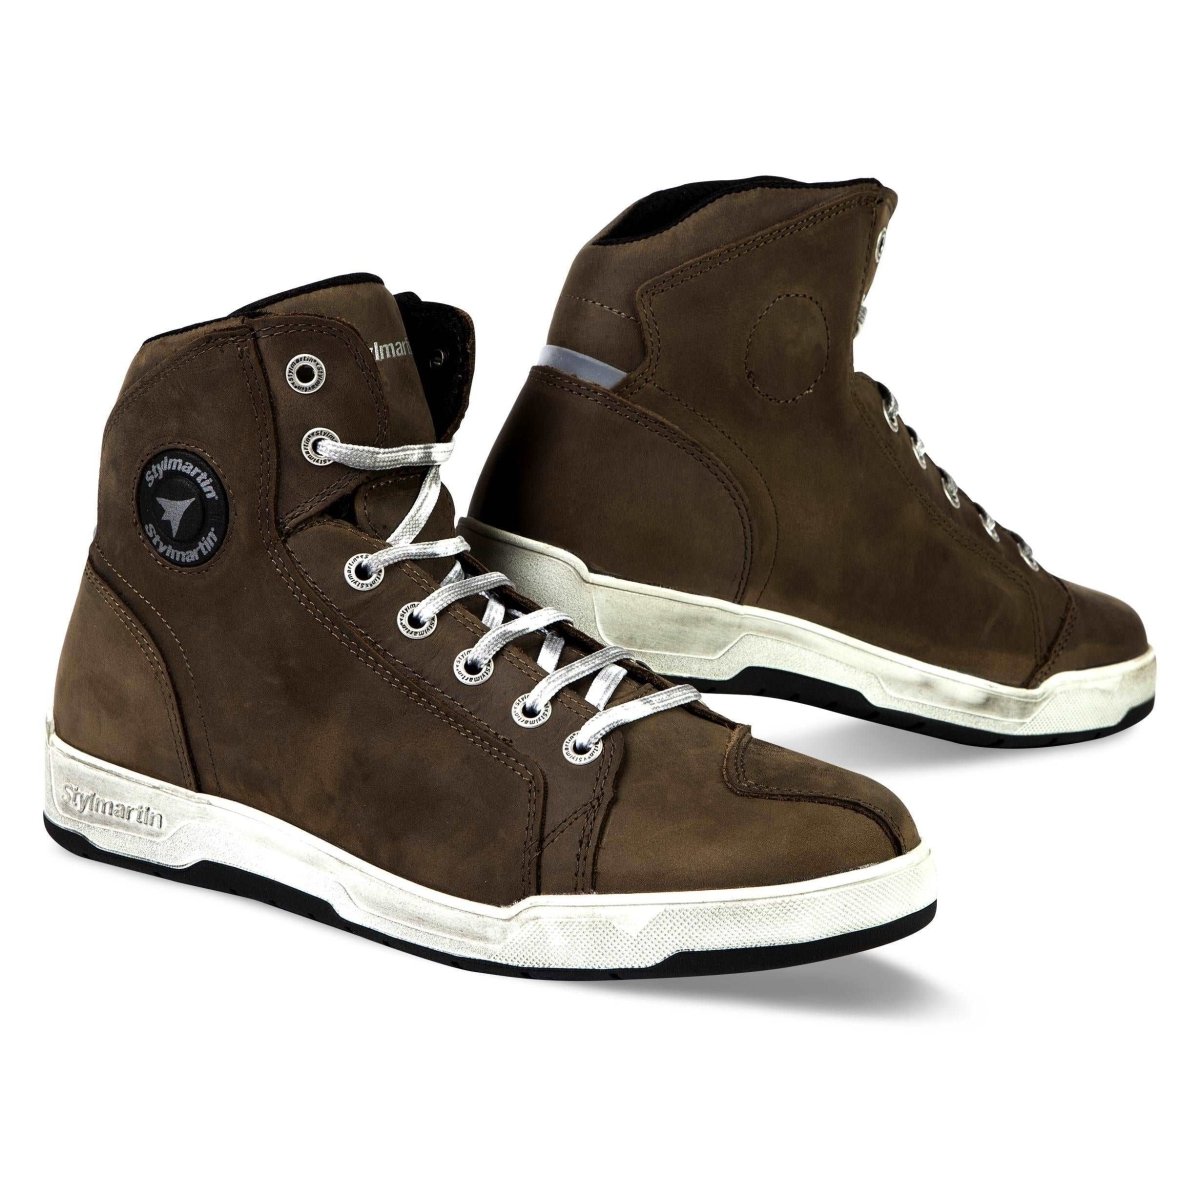 Stylmartin Marshall Water Proof Sneaker in Brown 